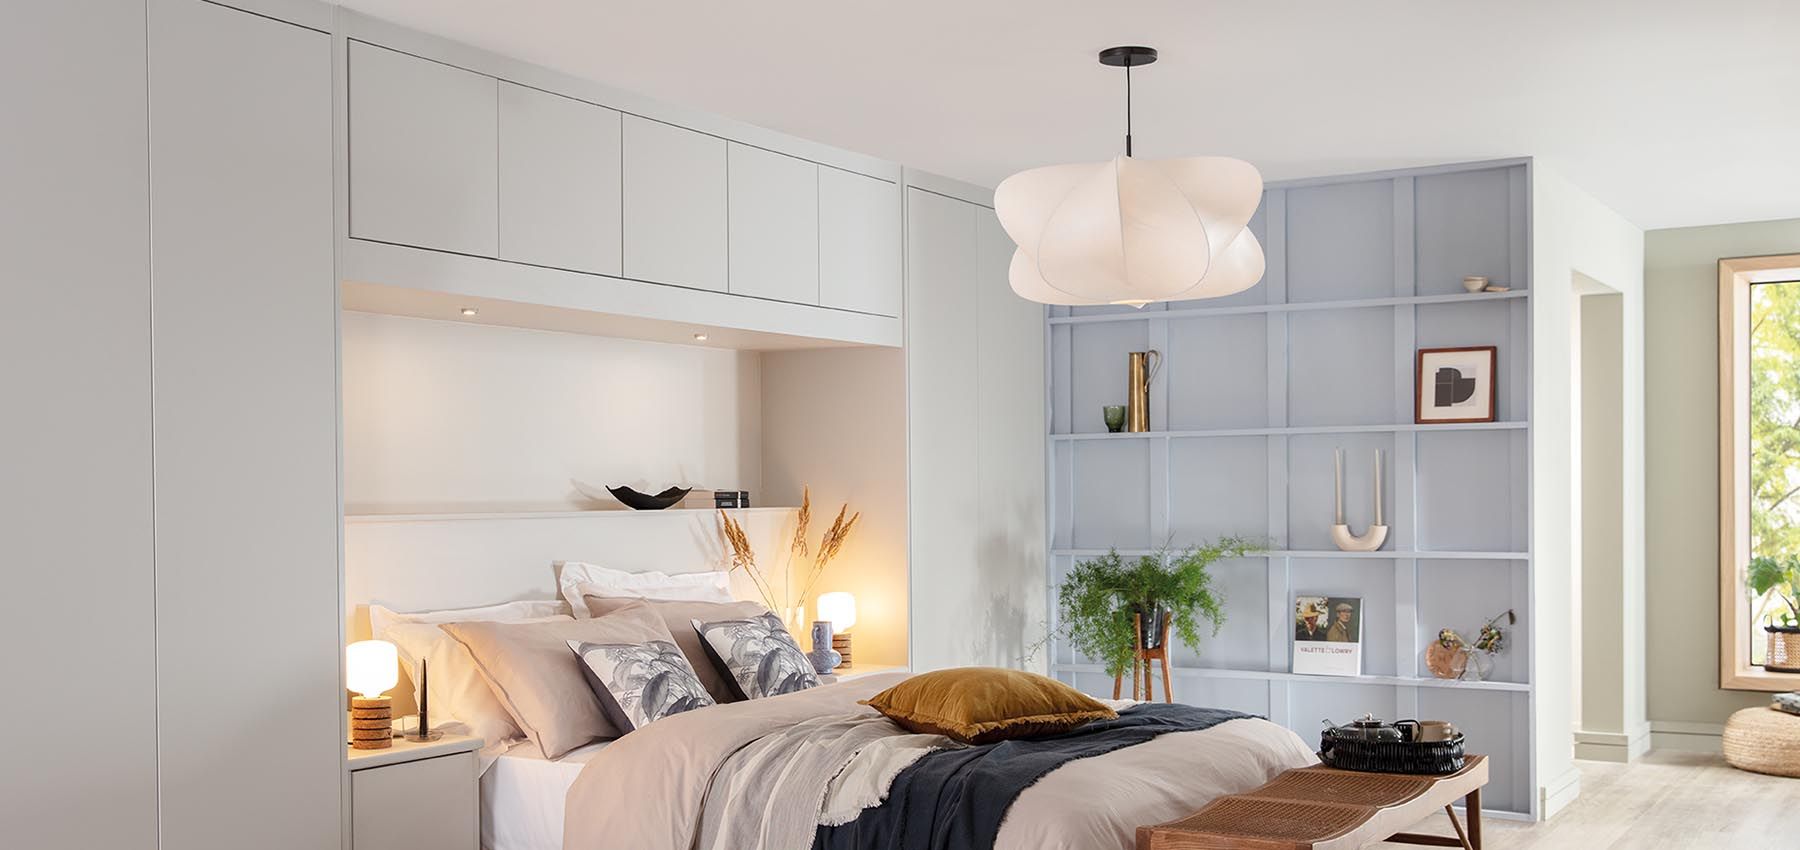 5 Reasons Why You'll Love Overbed Storage | Sharps Pertaining To Overbed Wardrobes (View 6 of 20)